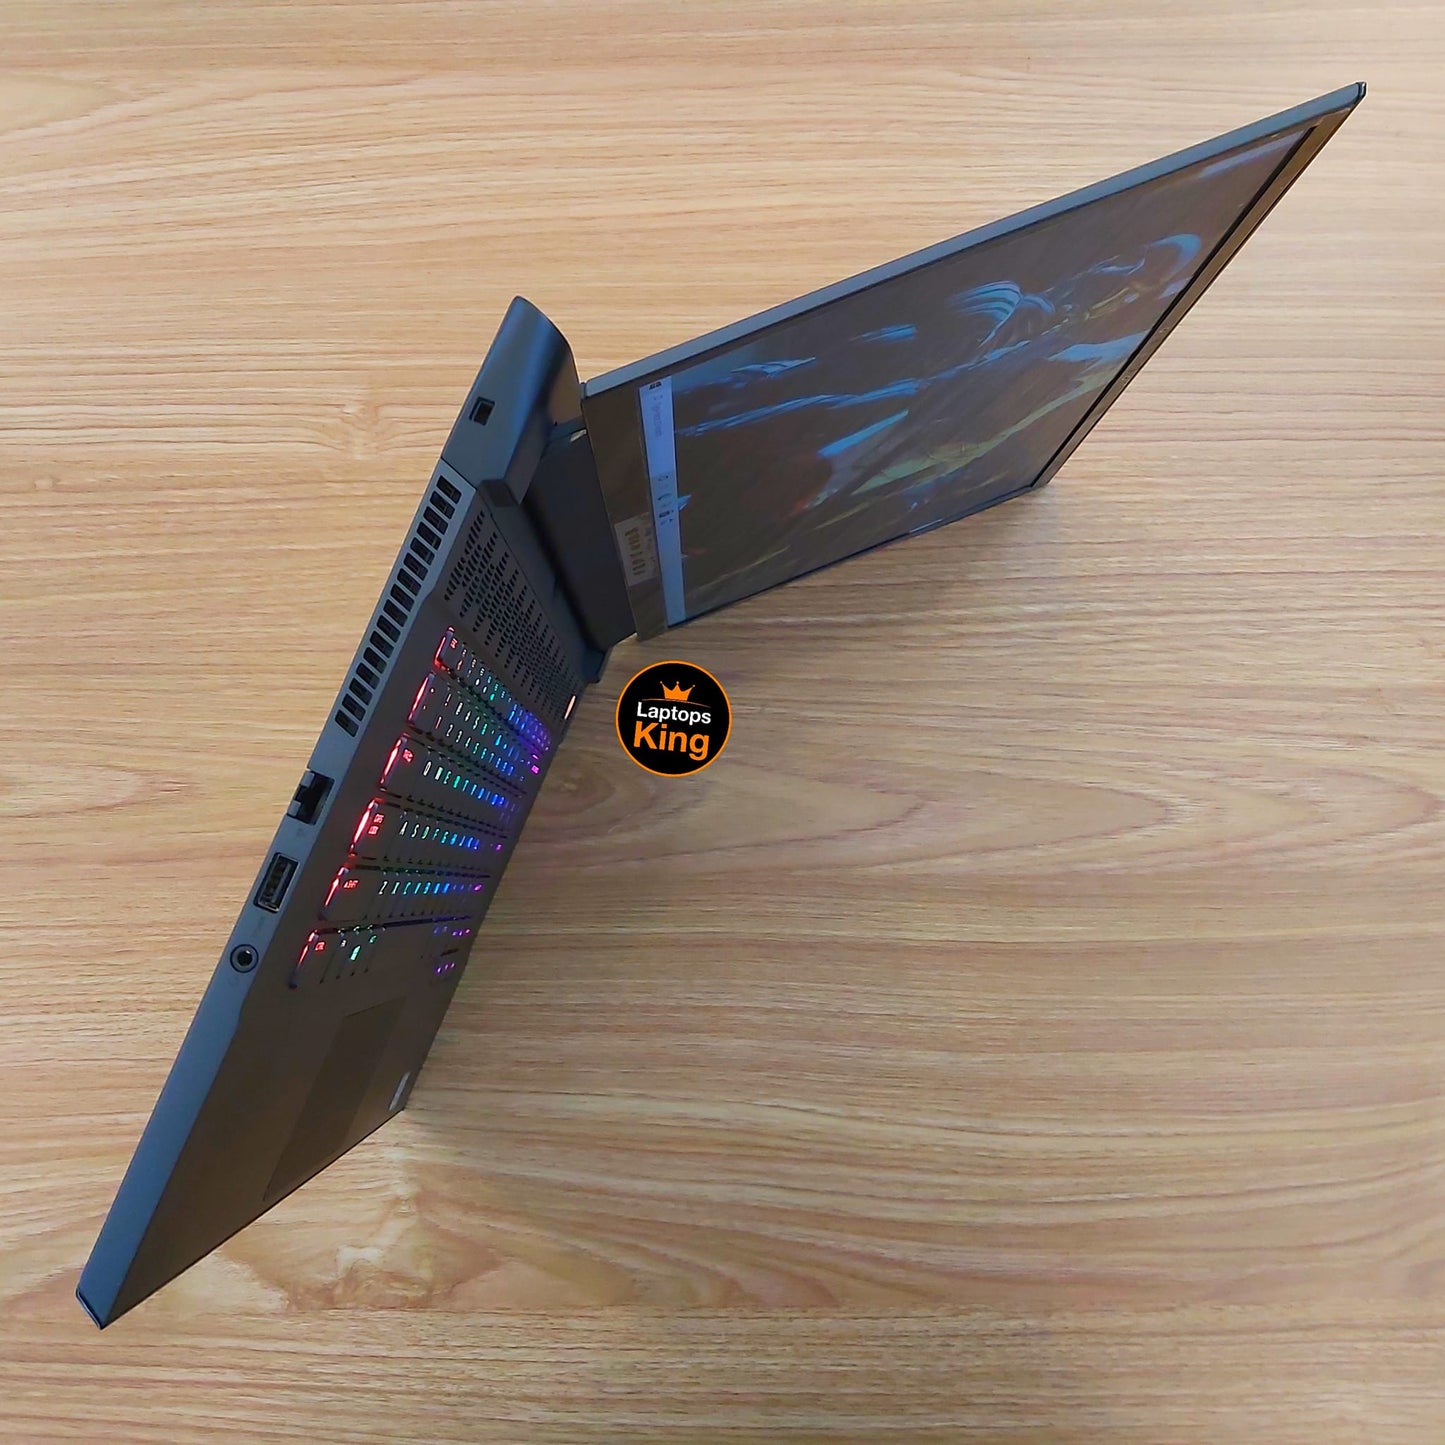 Alienware M15 i7 RTX 2080 Gaming Laptops (New Open Box)